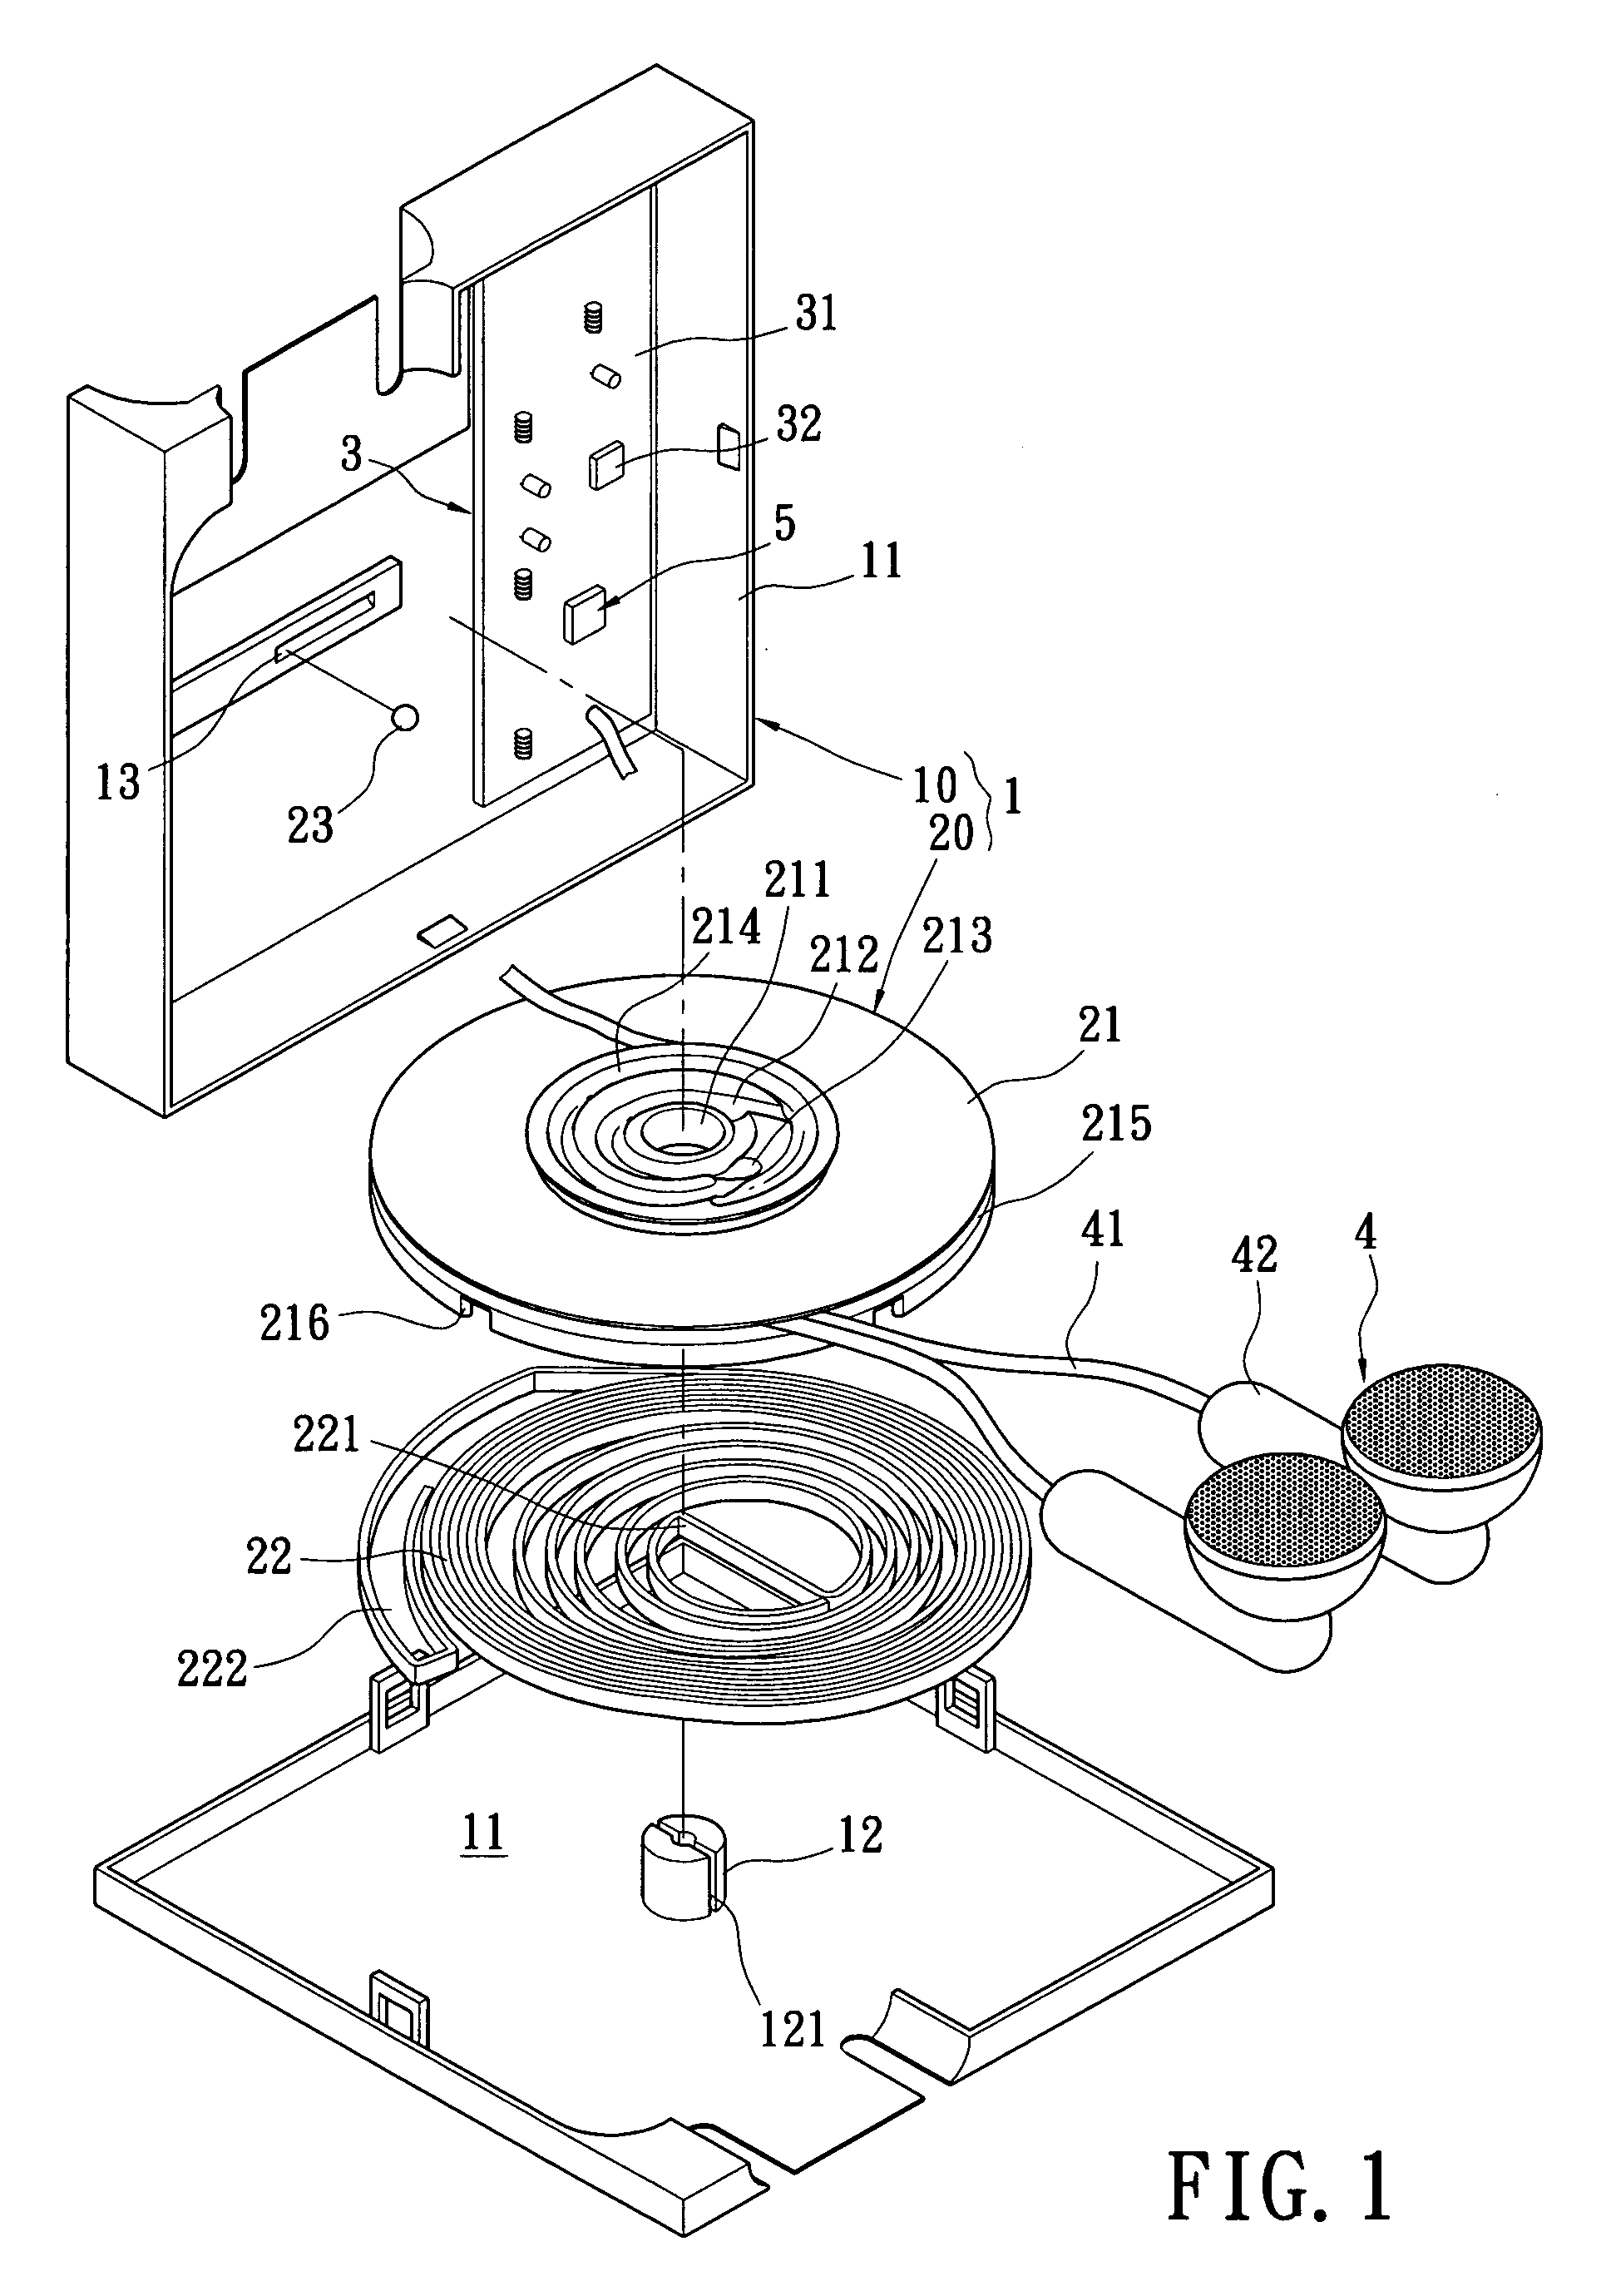 Reel device with music play function